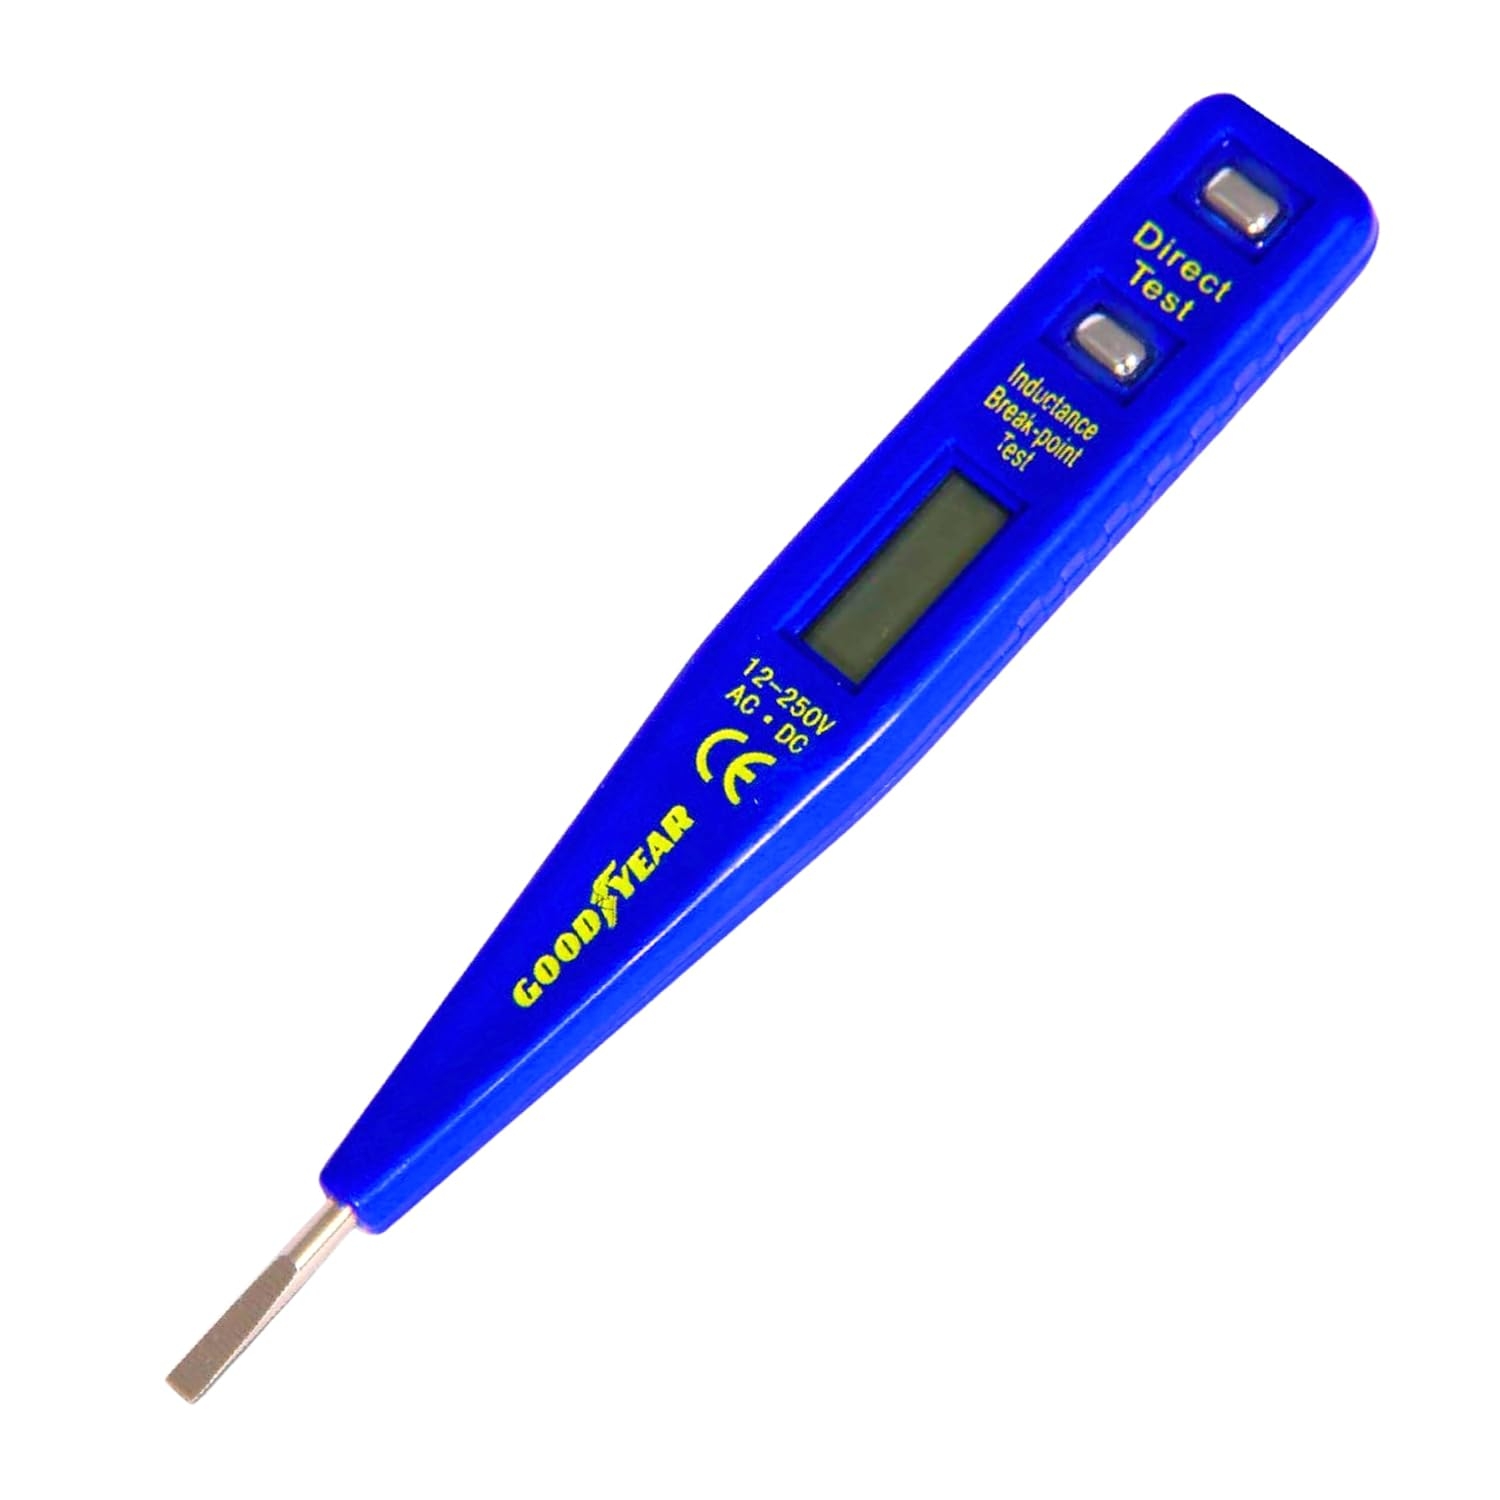 Goodyear Digital Tester with LCD Display & Neon Bulb, Digital Detection Tester, Digital Voltage Tester, 1 pcs Piece